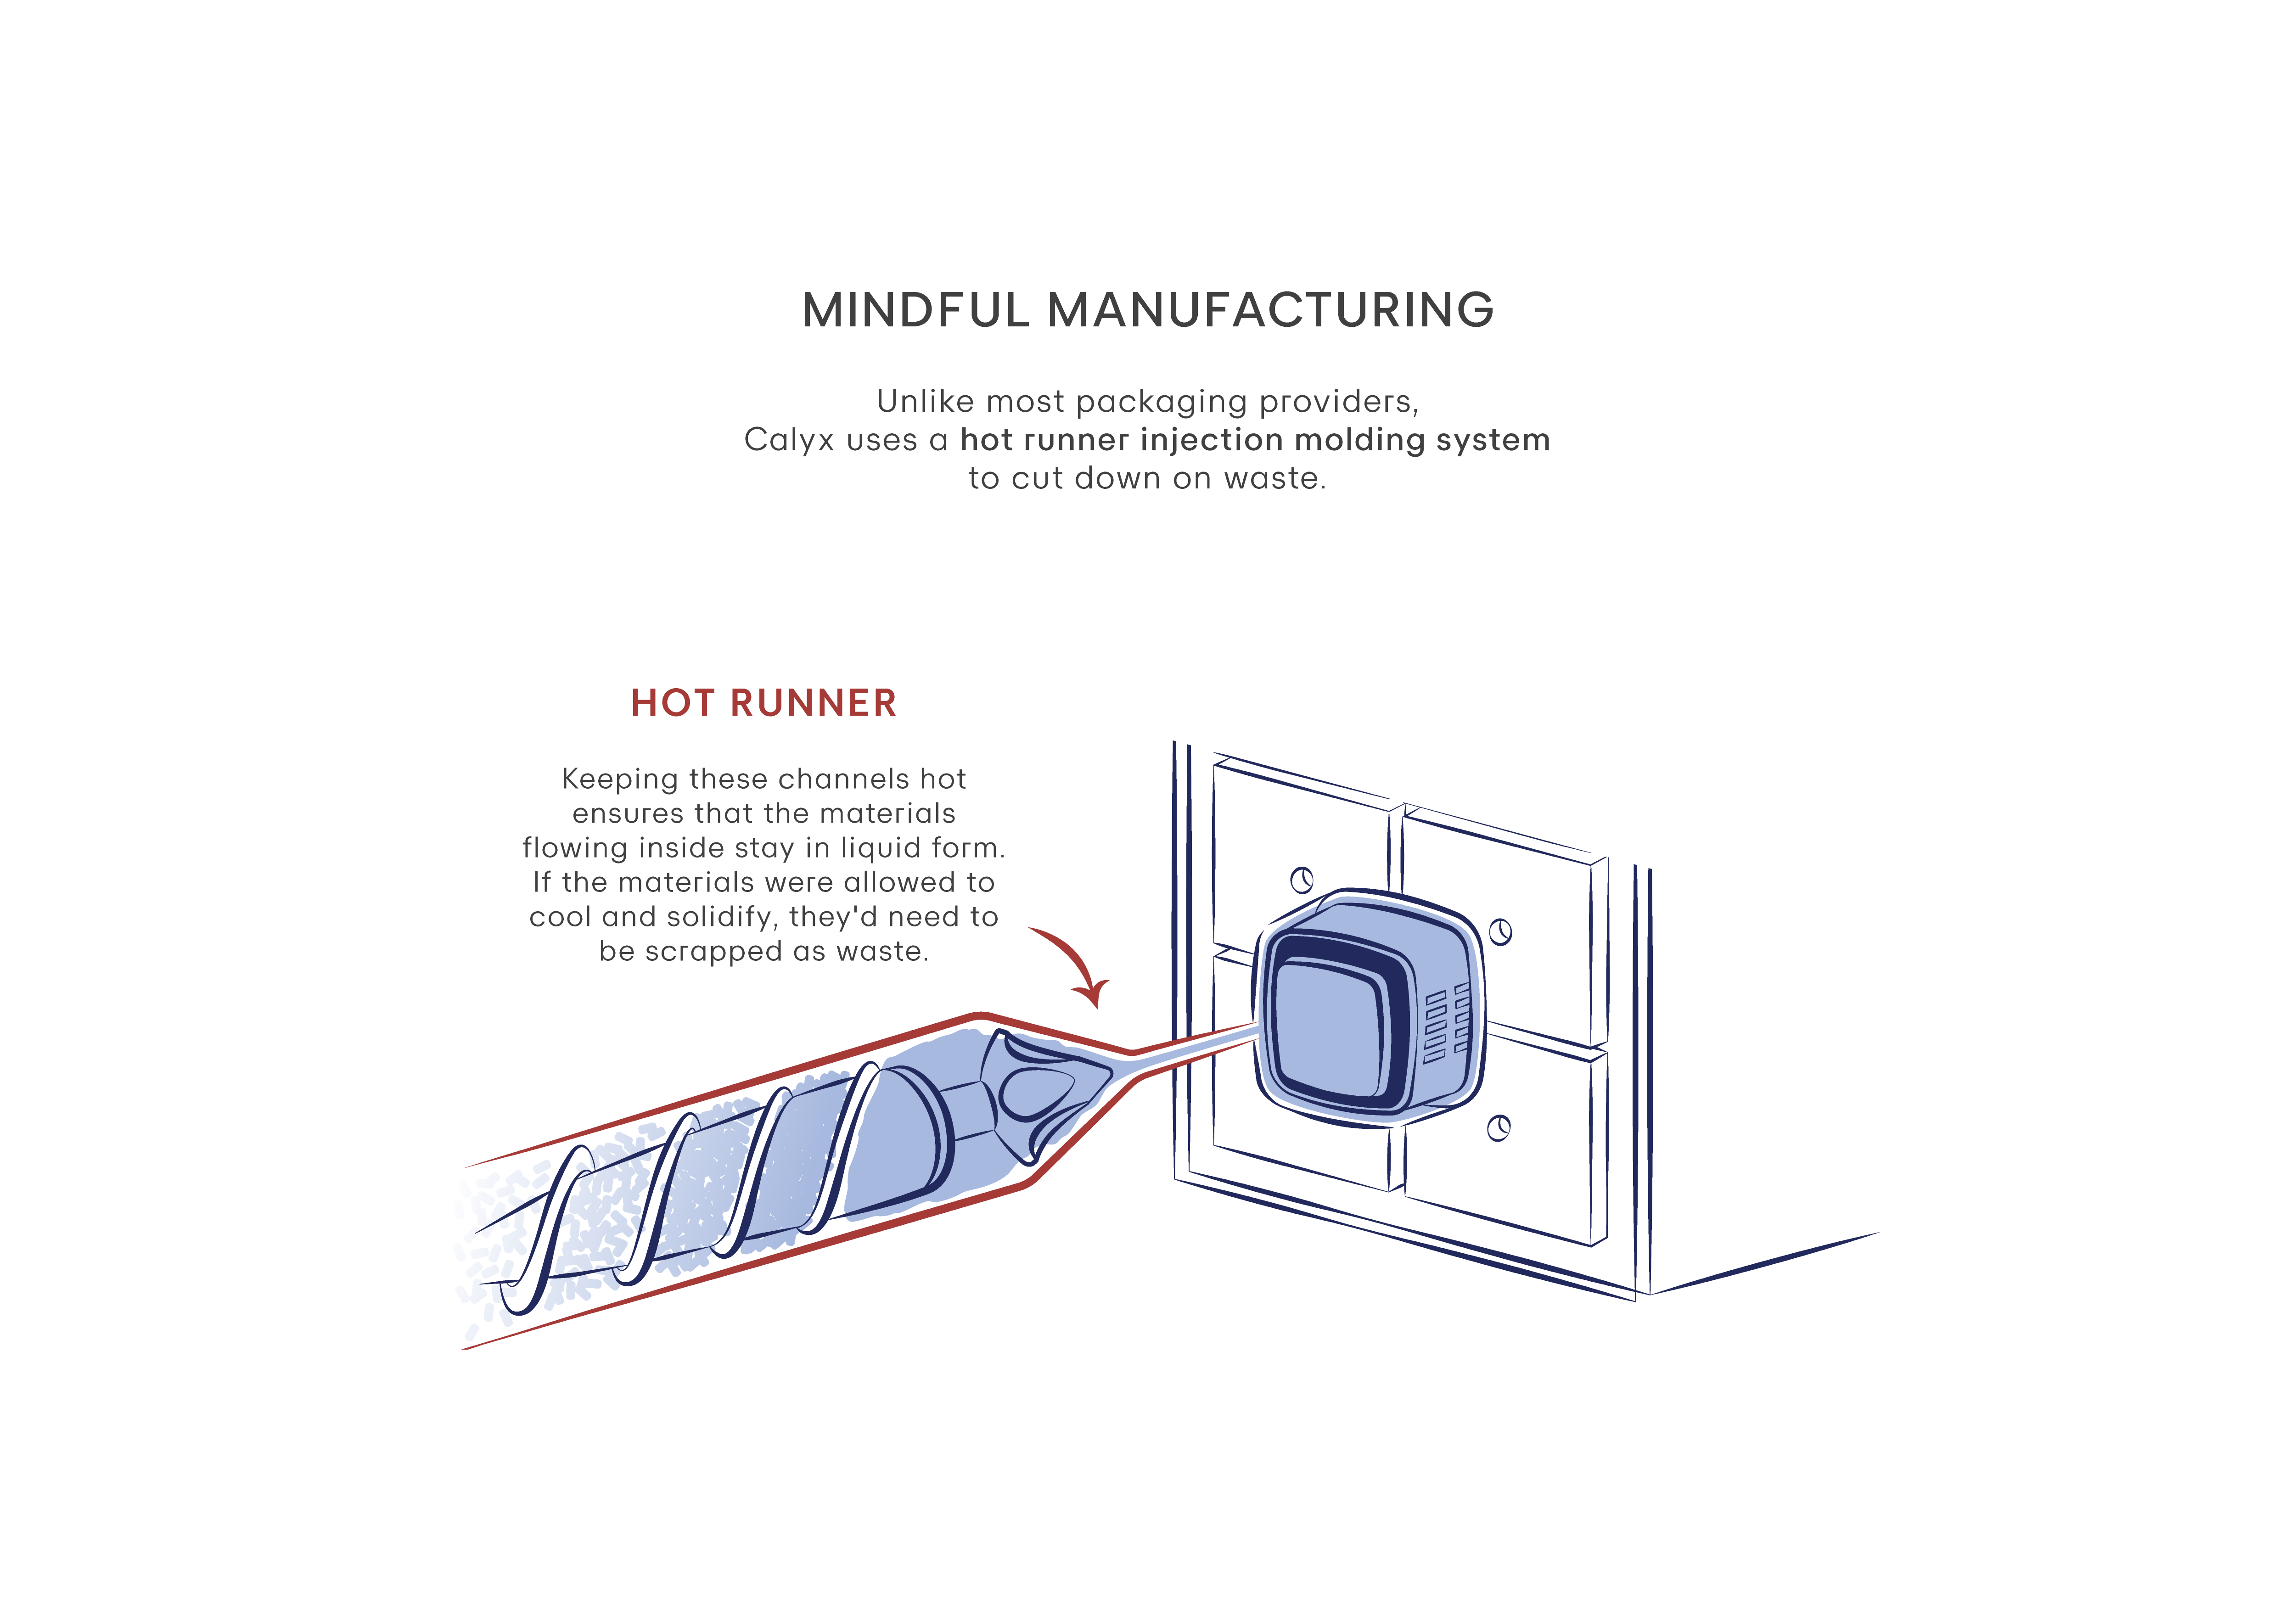 Graphic explain how Calyx's hot runner injection molding system reduces manufacturing waste